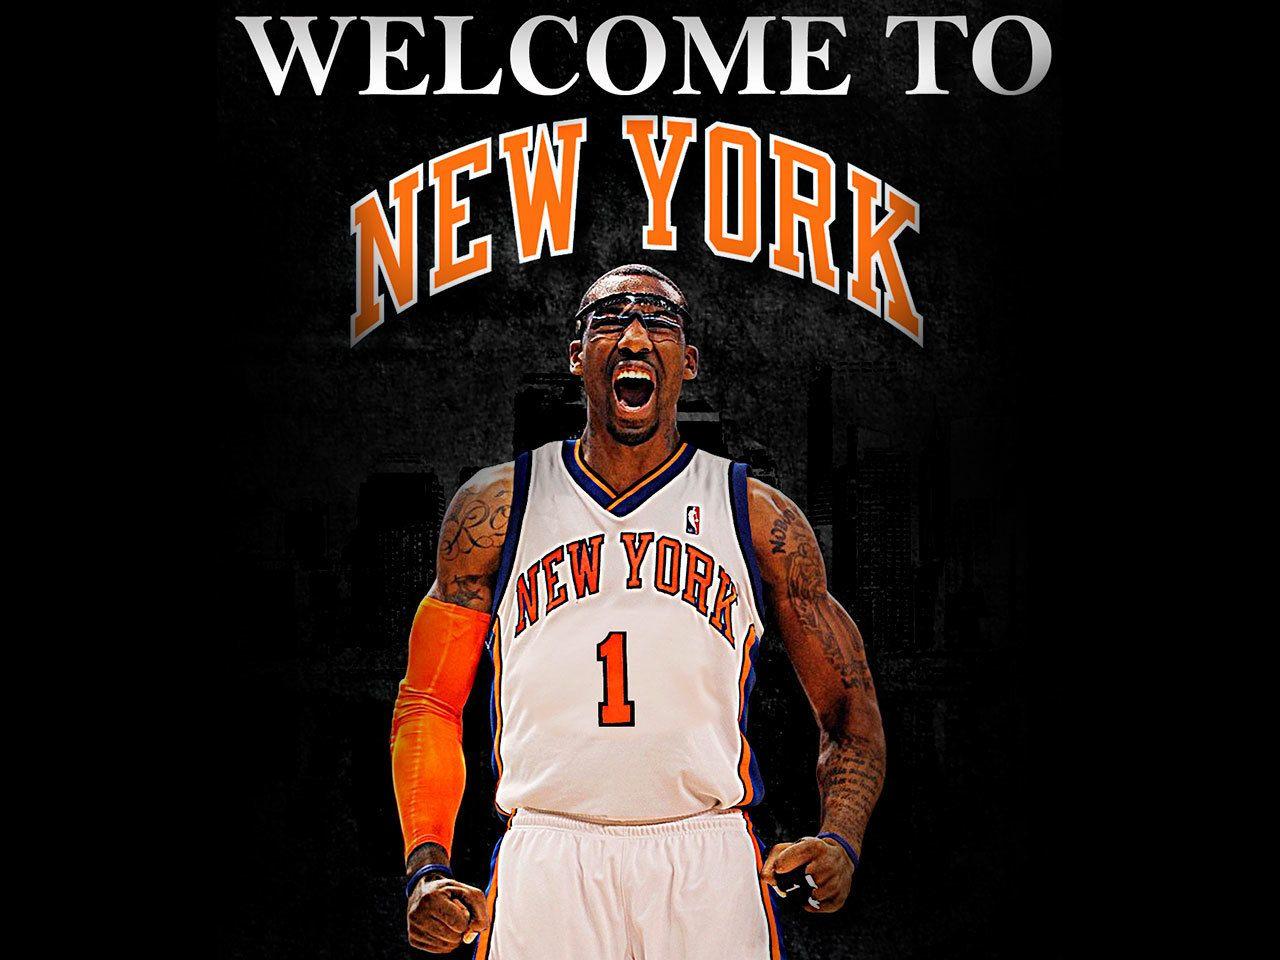 NY Knicks. Amare Stoudemire NY Knicks Welcome Wallpaper